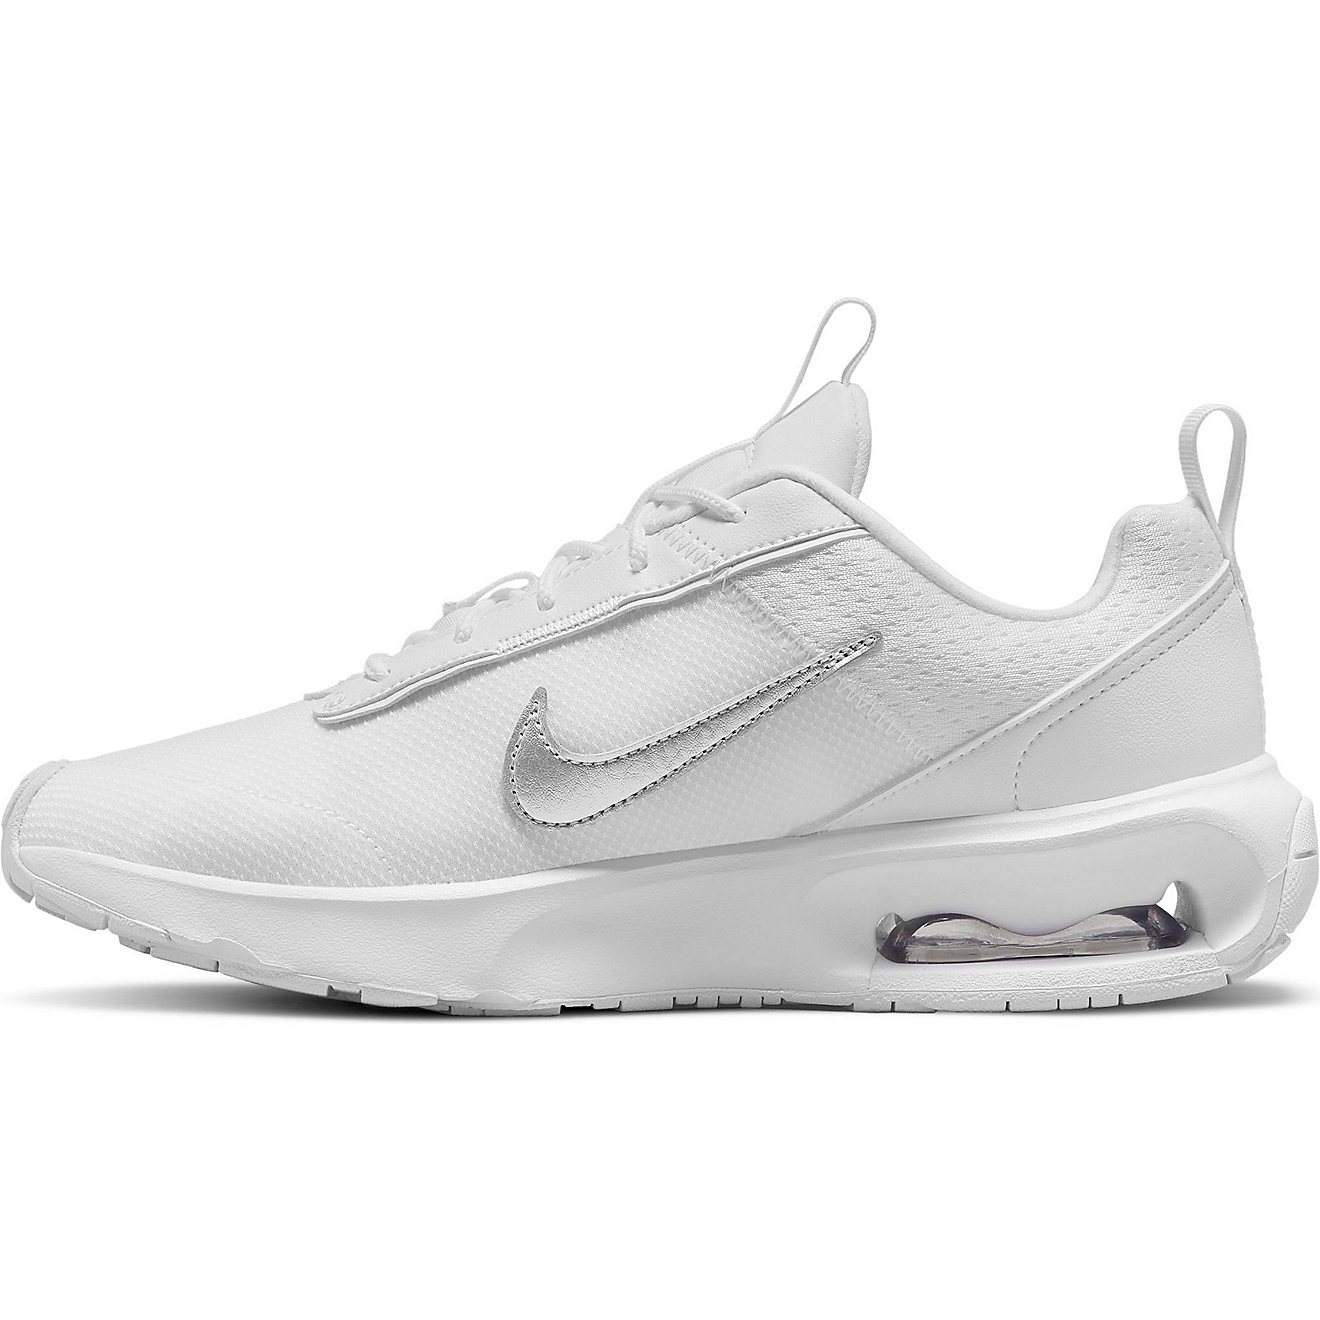 Nike Women's Air Max Intrlk Lite Shoes | Free Shipping at Academy